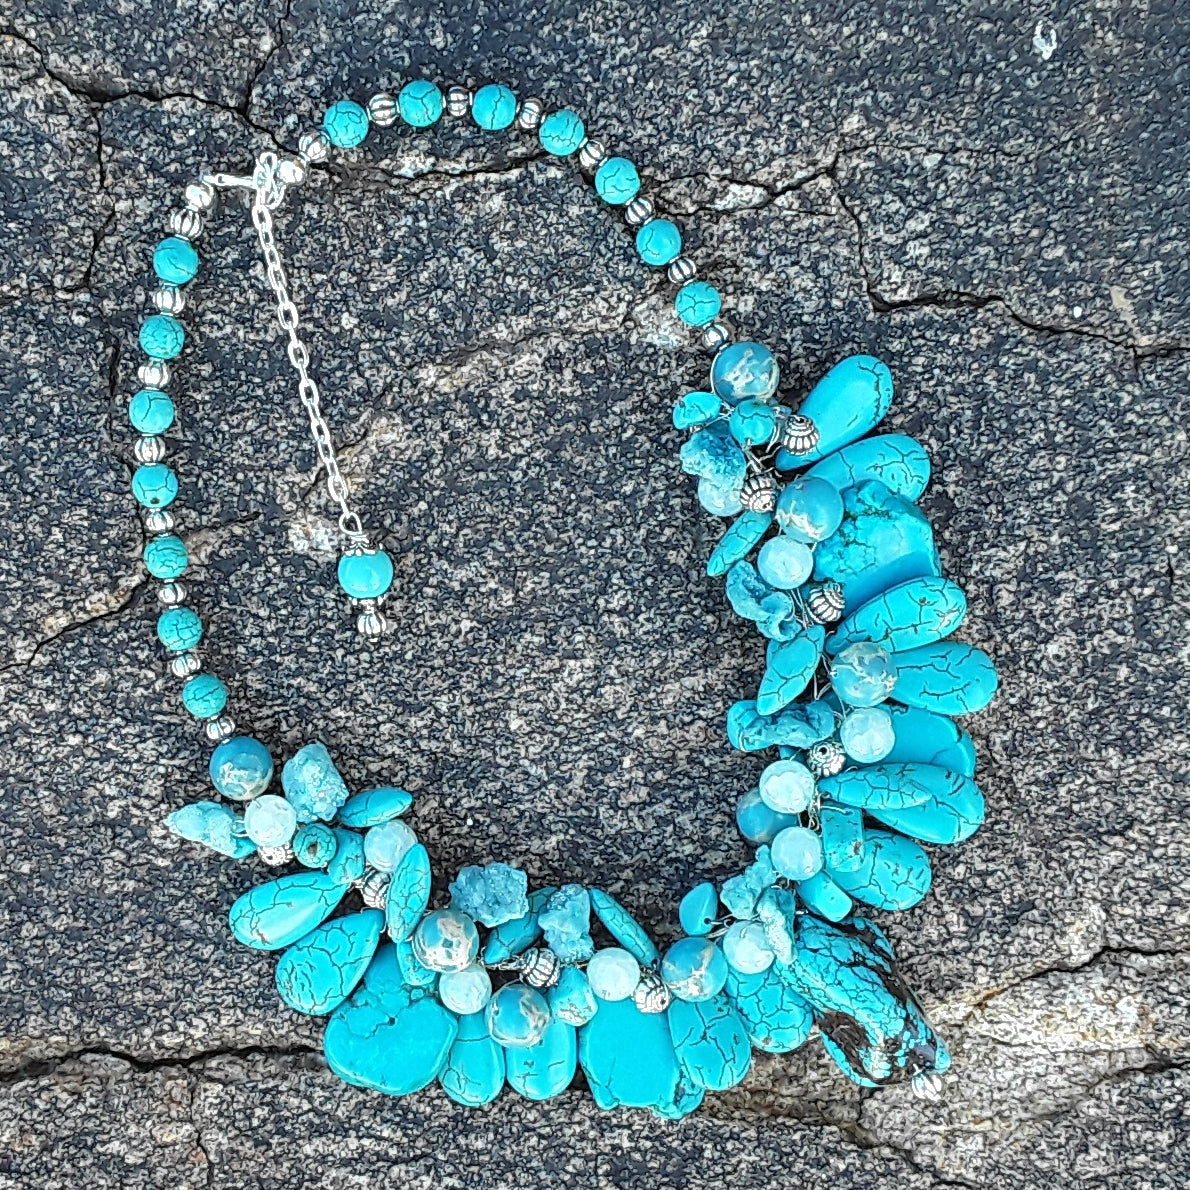 Teal Statement Tagua Necklace and Earrings Set - Galapagos Tagua Jewelry